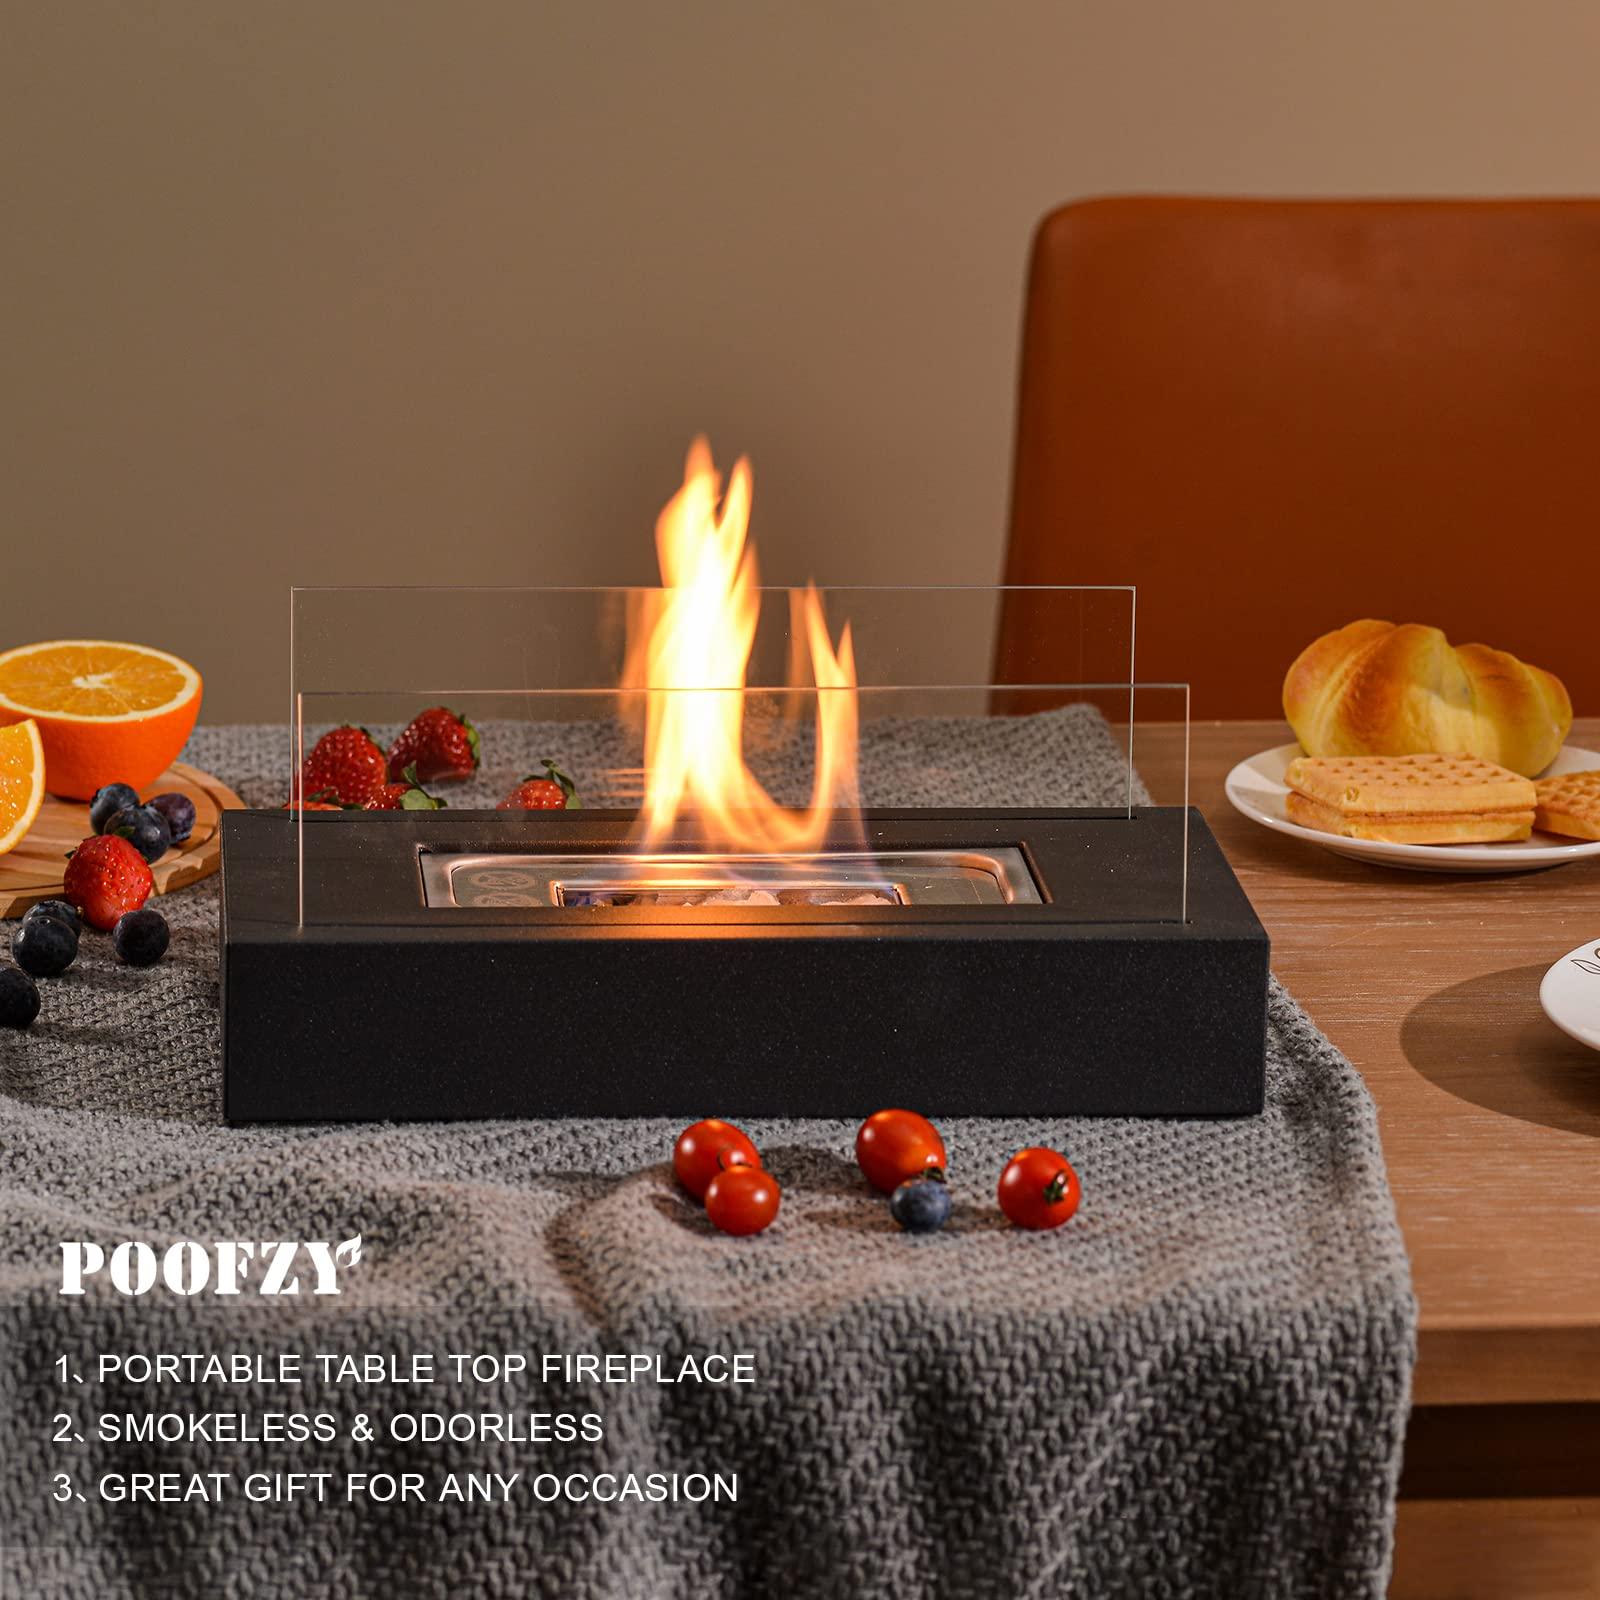 Poofzy Portable Fireplace Indoor Outdoor, Table Top Firepit with Flame Snuffer & Funnel - 13.8 x 7 x 5.7 Inch - CookCave